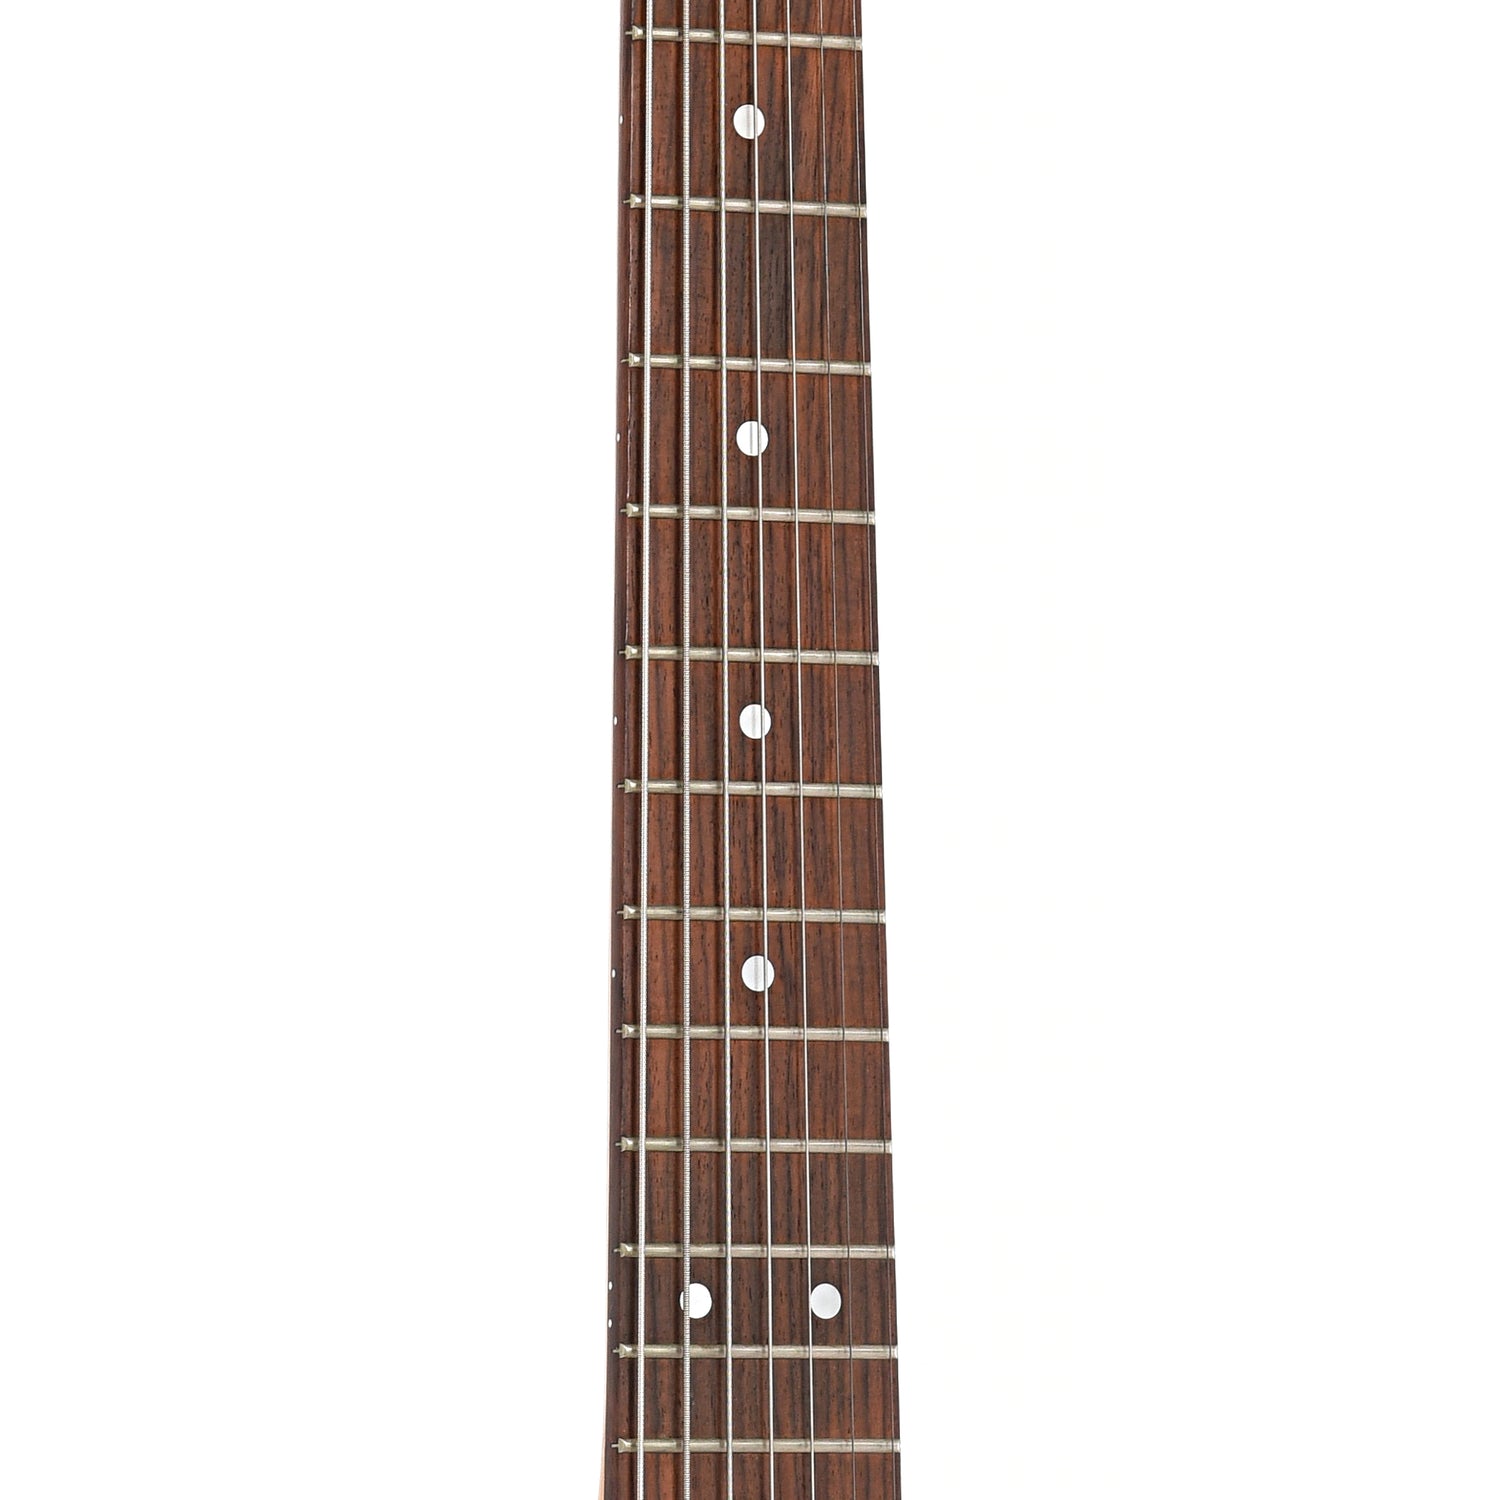 Image 6 of Ibanez AX75217- SKU# 30U-210995 : Product Type Solid Body Electric Guitars : Elderly Instruments